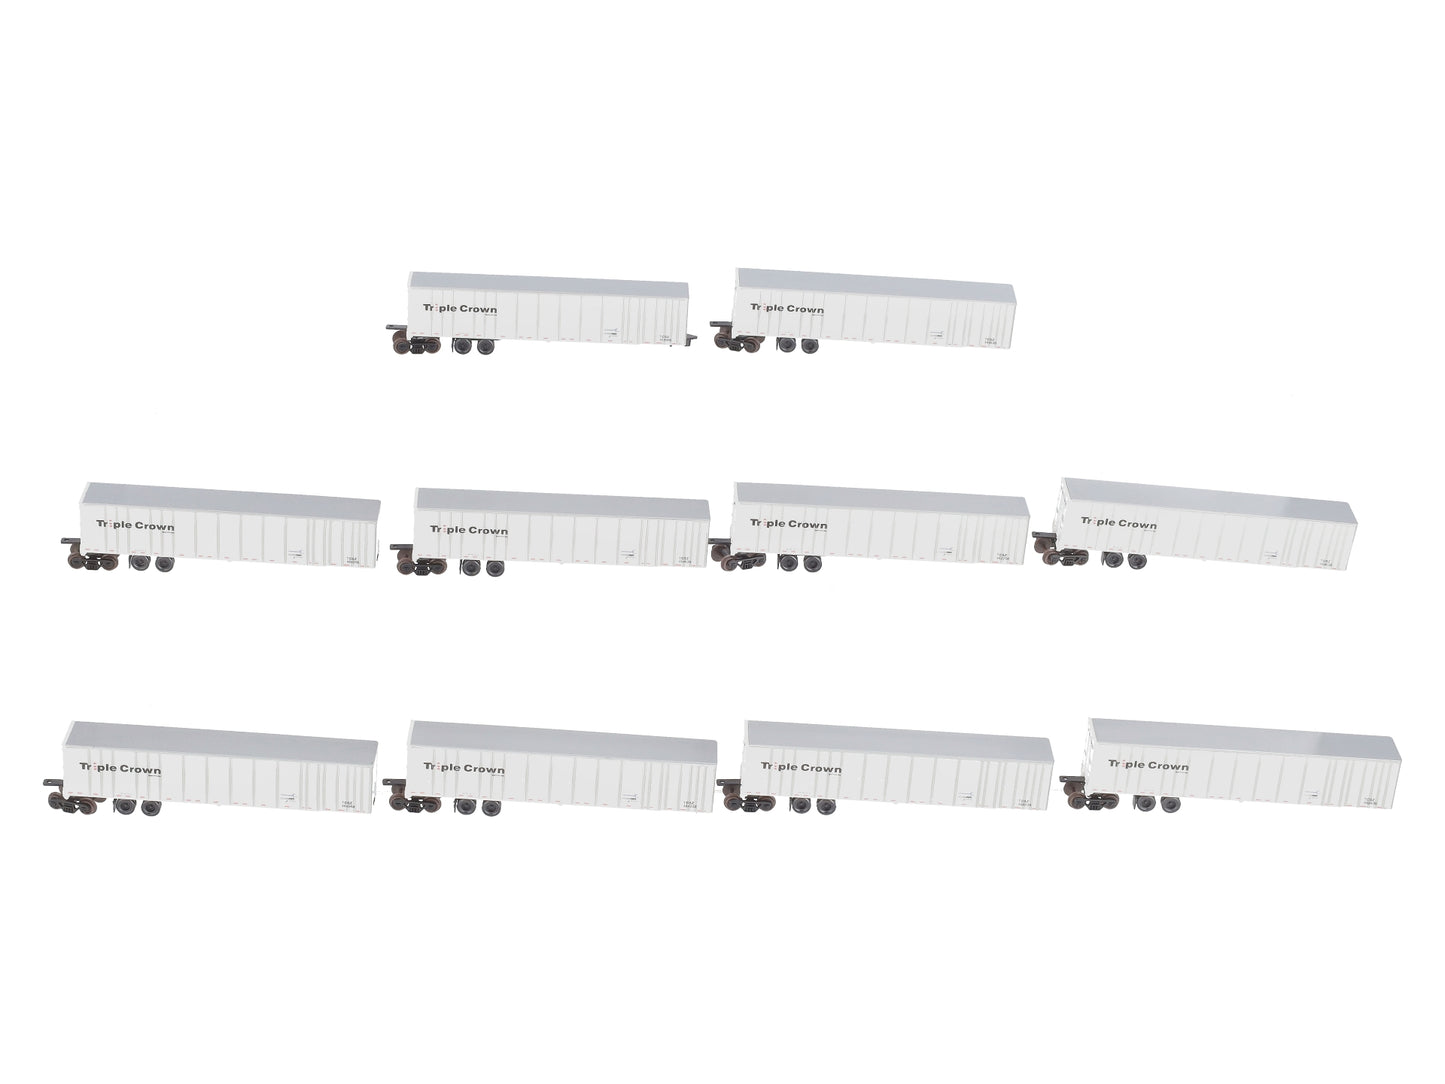 Deluxe Innovations 180130 N Triple Crown Services Set #2 Roadrailer (Pack of 10) EX/Box